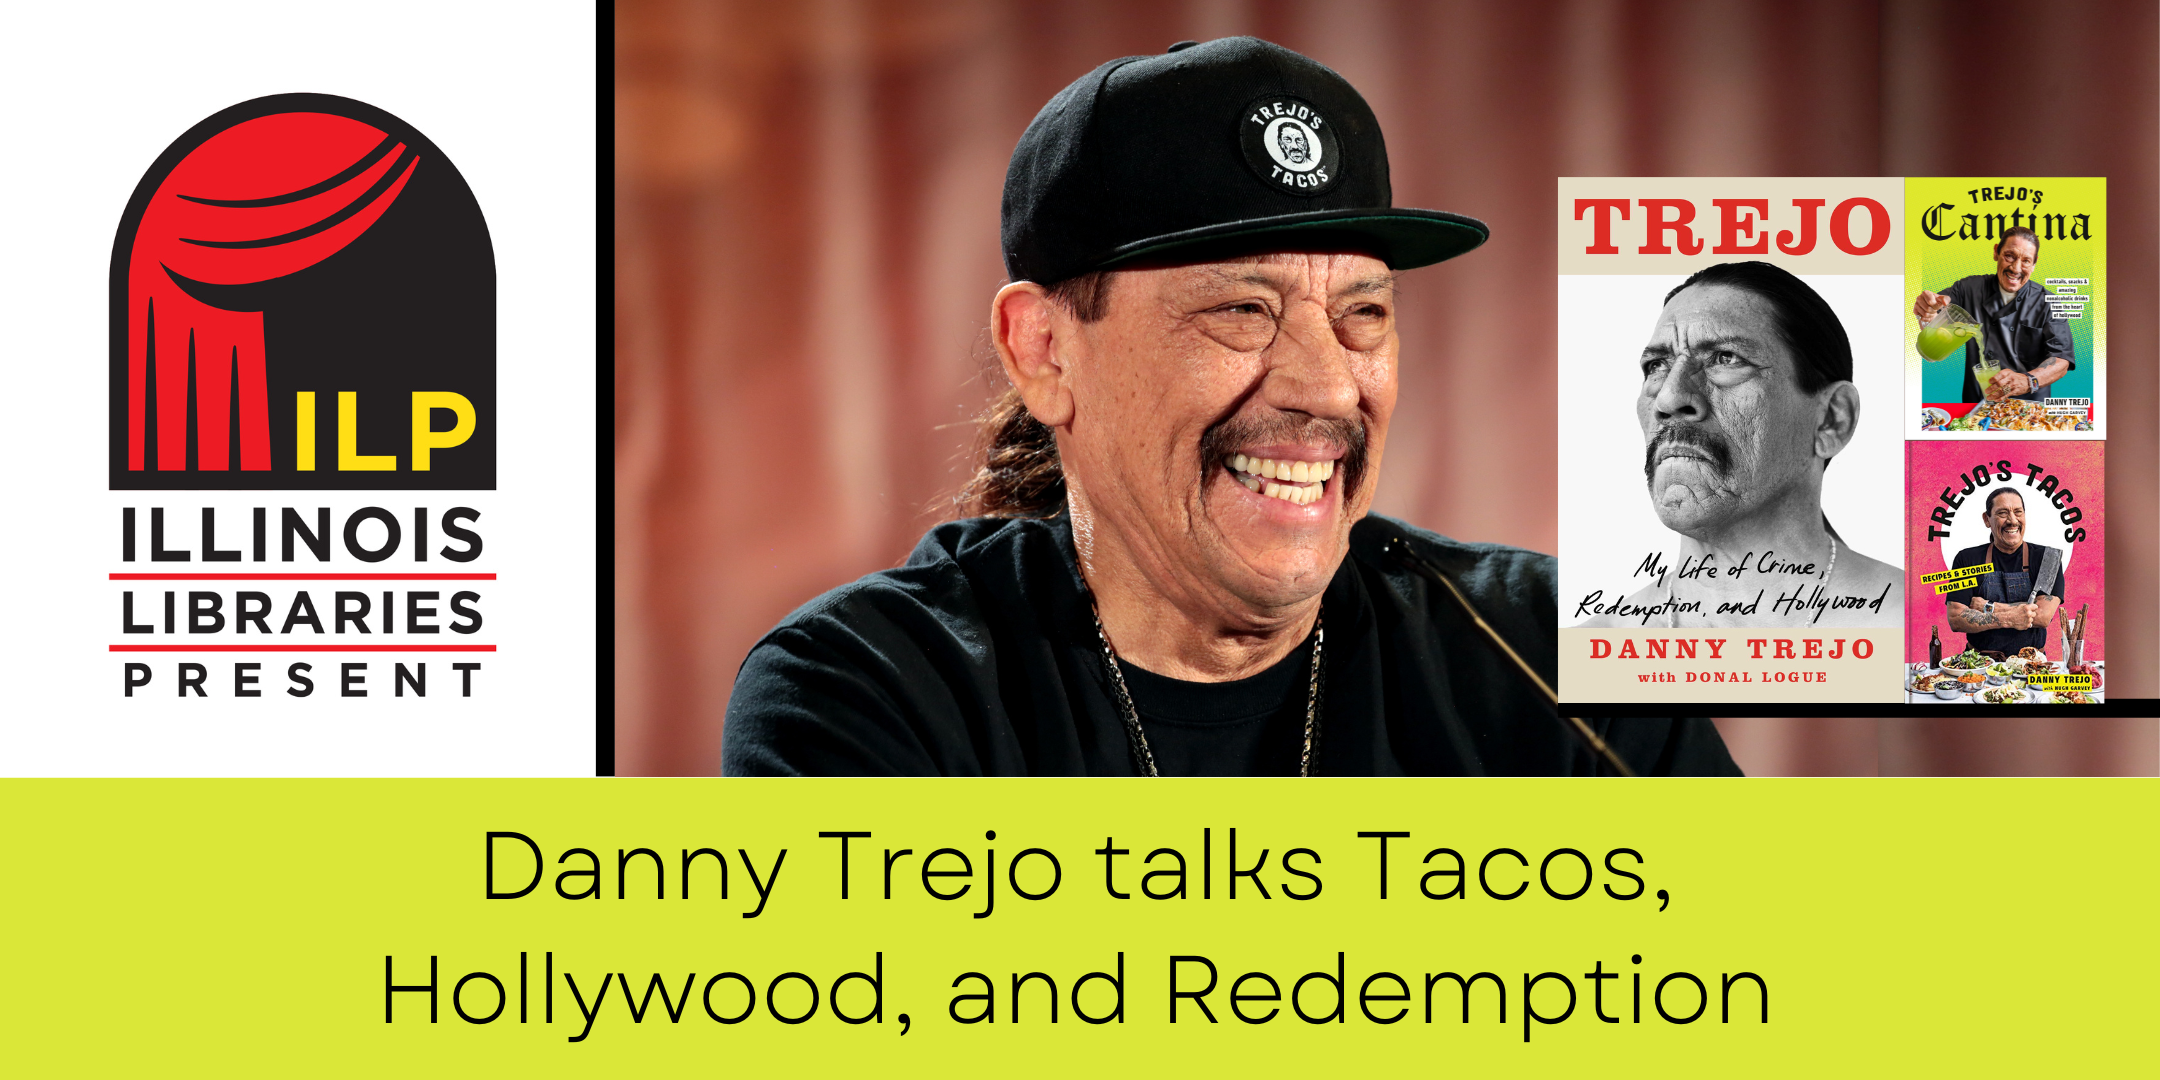 image of "Danny Trejo talks Tacos, Hollywood, and Redemption"